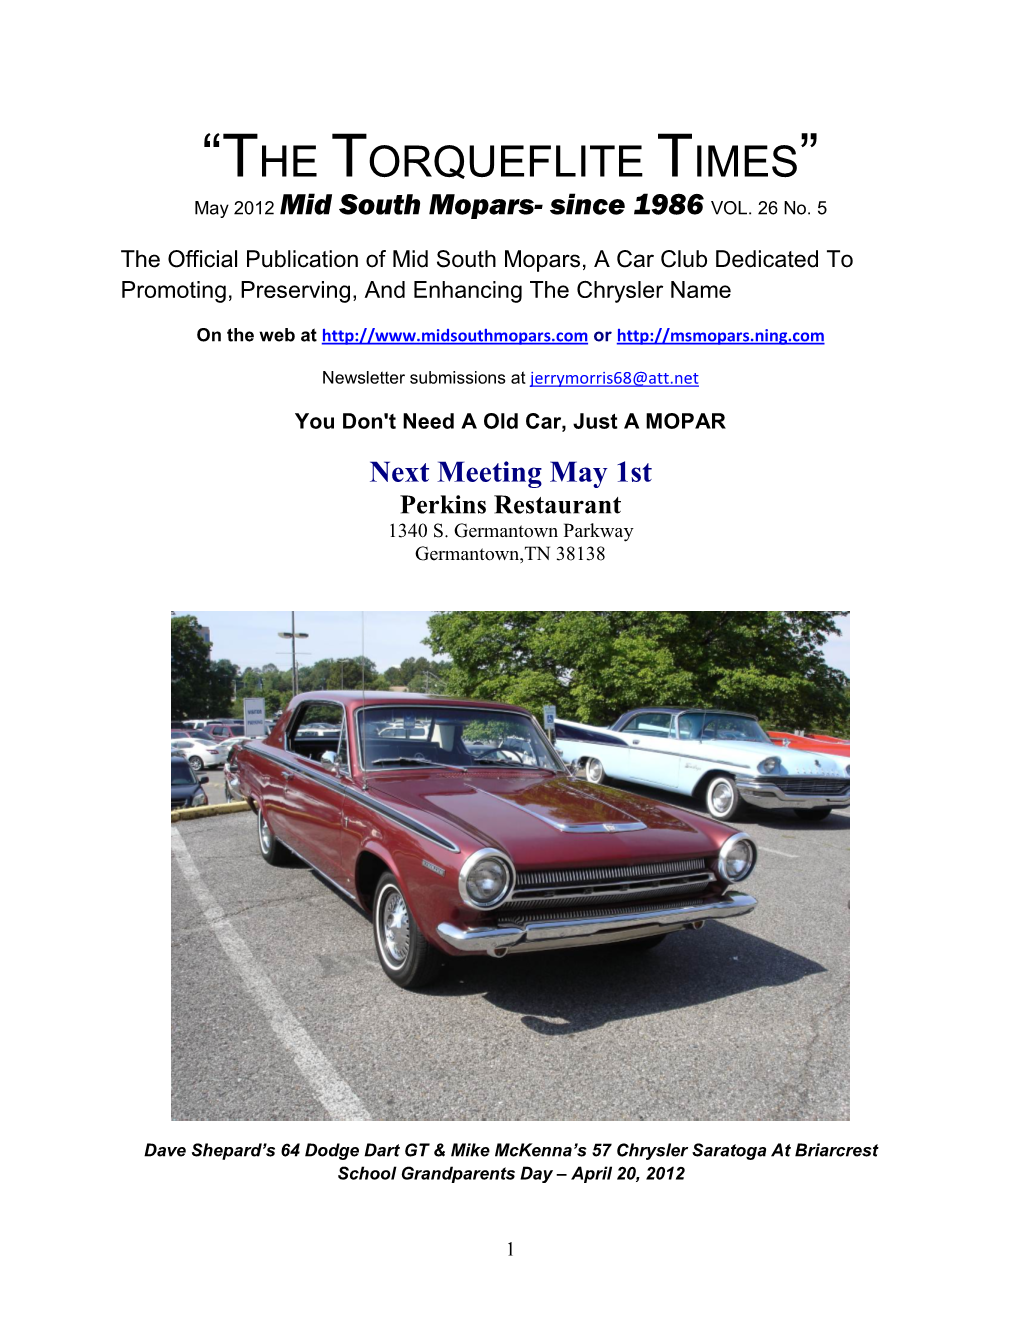 “THE TORQUEFLITE TIMES” May 2012 Mid South Mopars- Since 1986 VOL